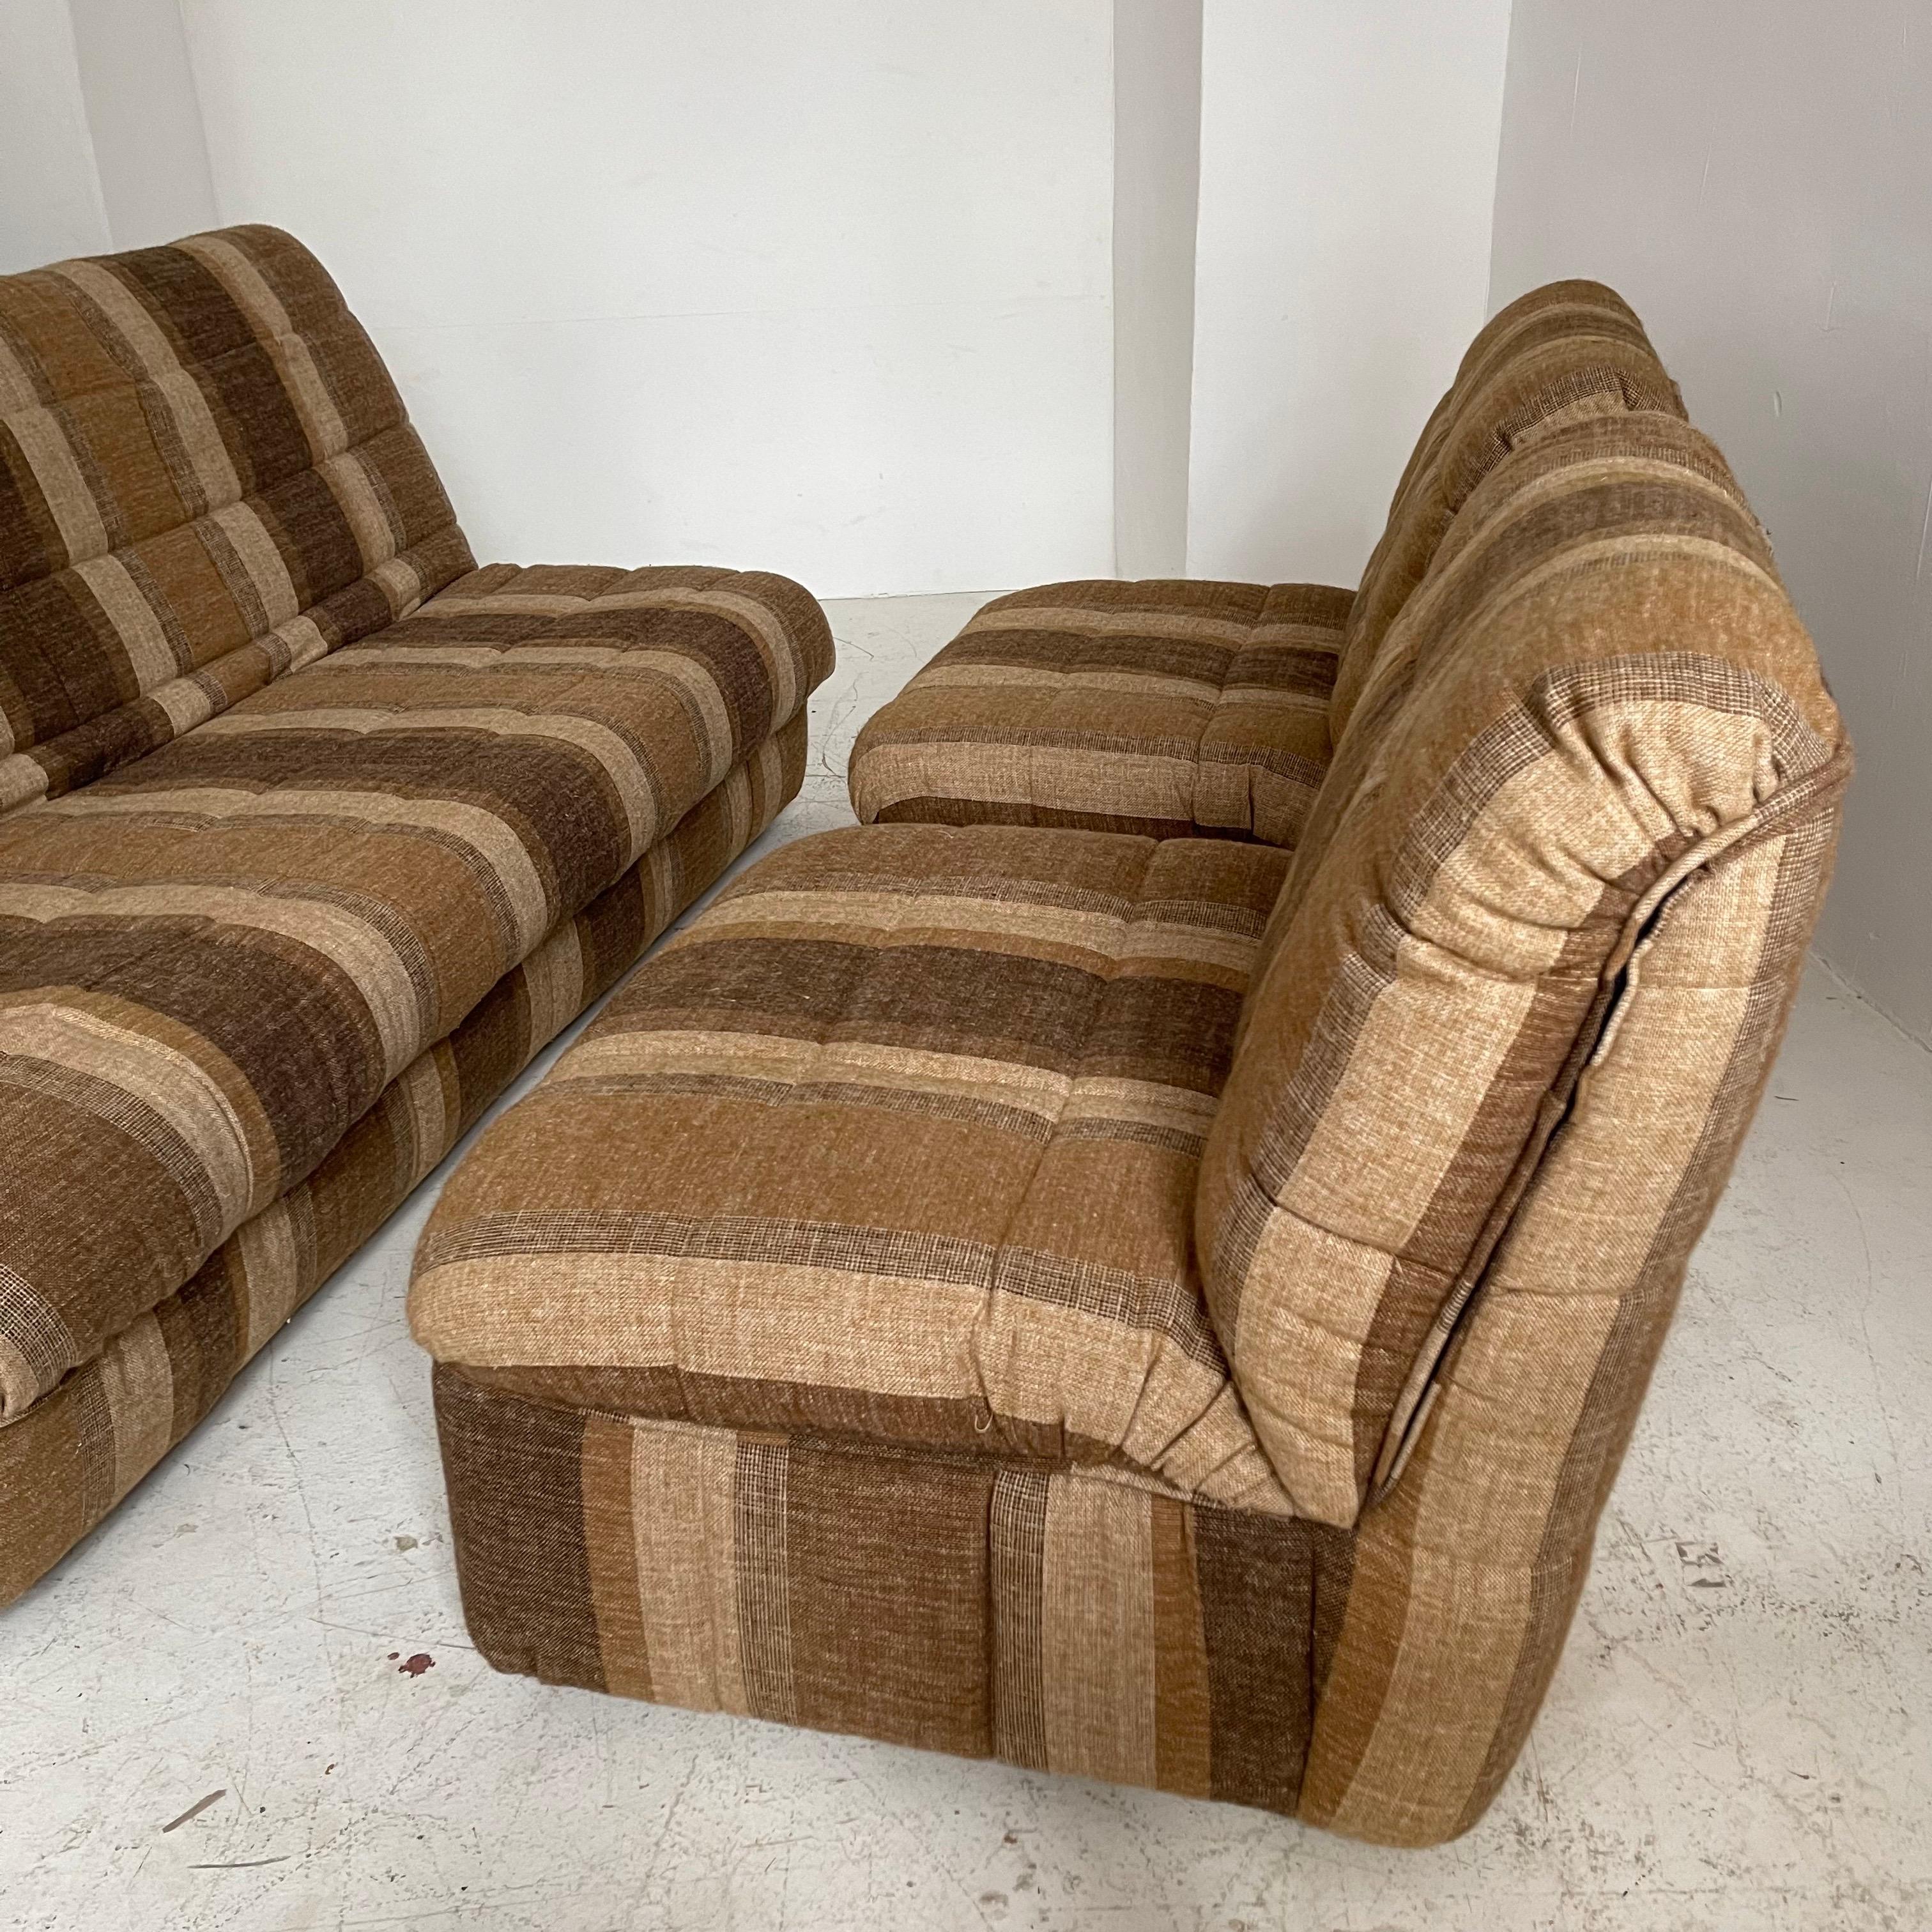 Cinna / Ligne Roset Daybed Lounge Chairs GAO Design Jean Paul Laloy, France 1975 For Sale 2